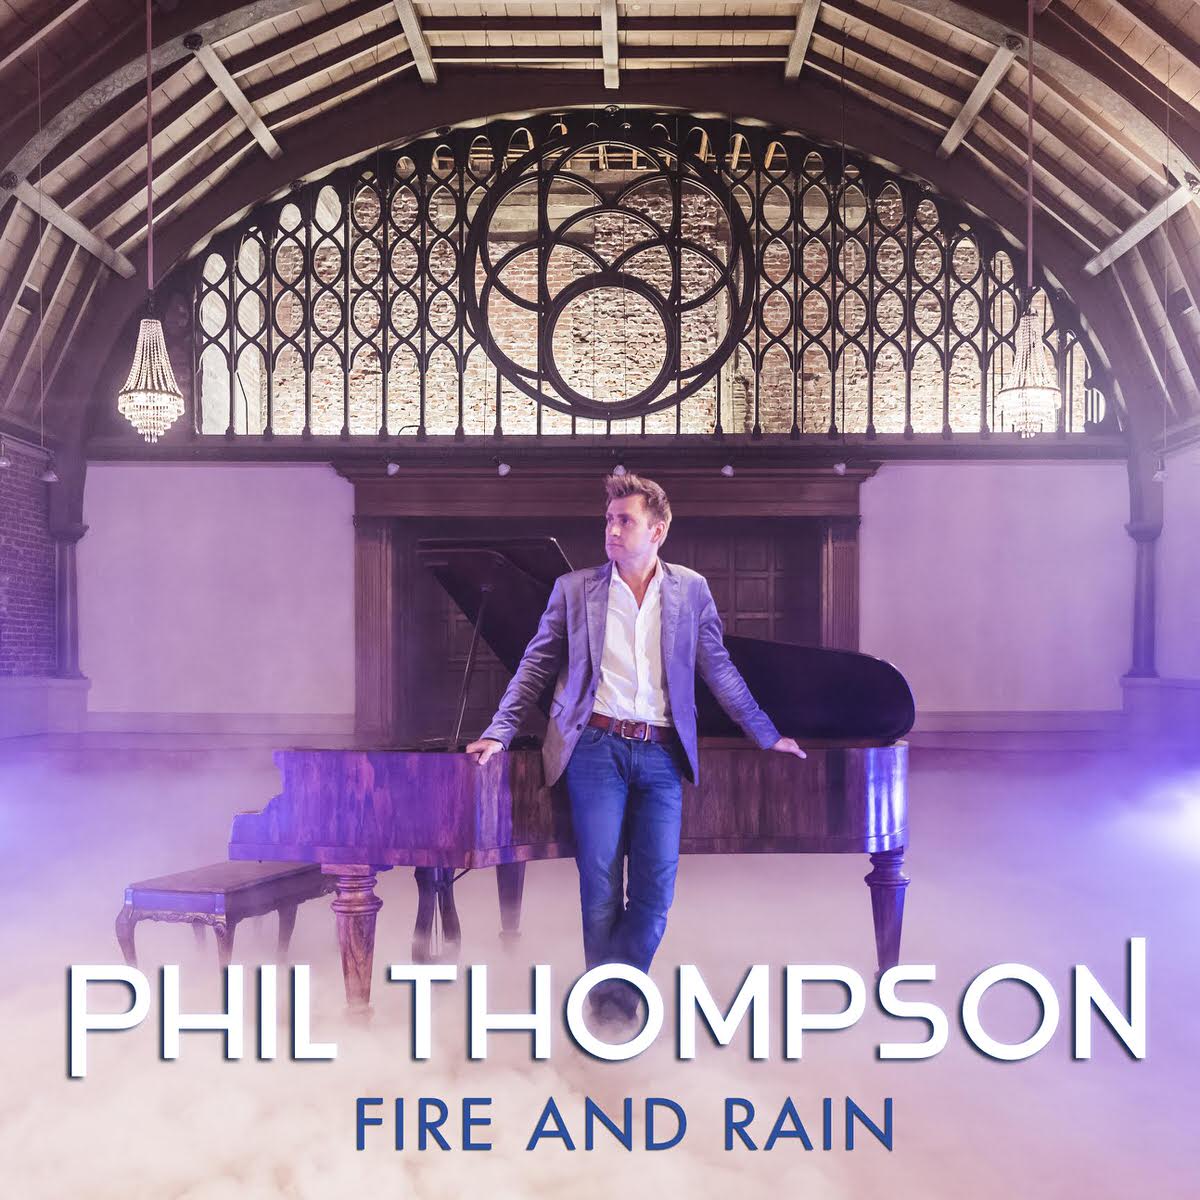 Phil Thompson at Grand Piano Surrounded by Smoke Performing Fire and Rain by James Taylor